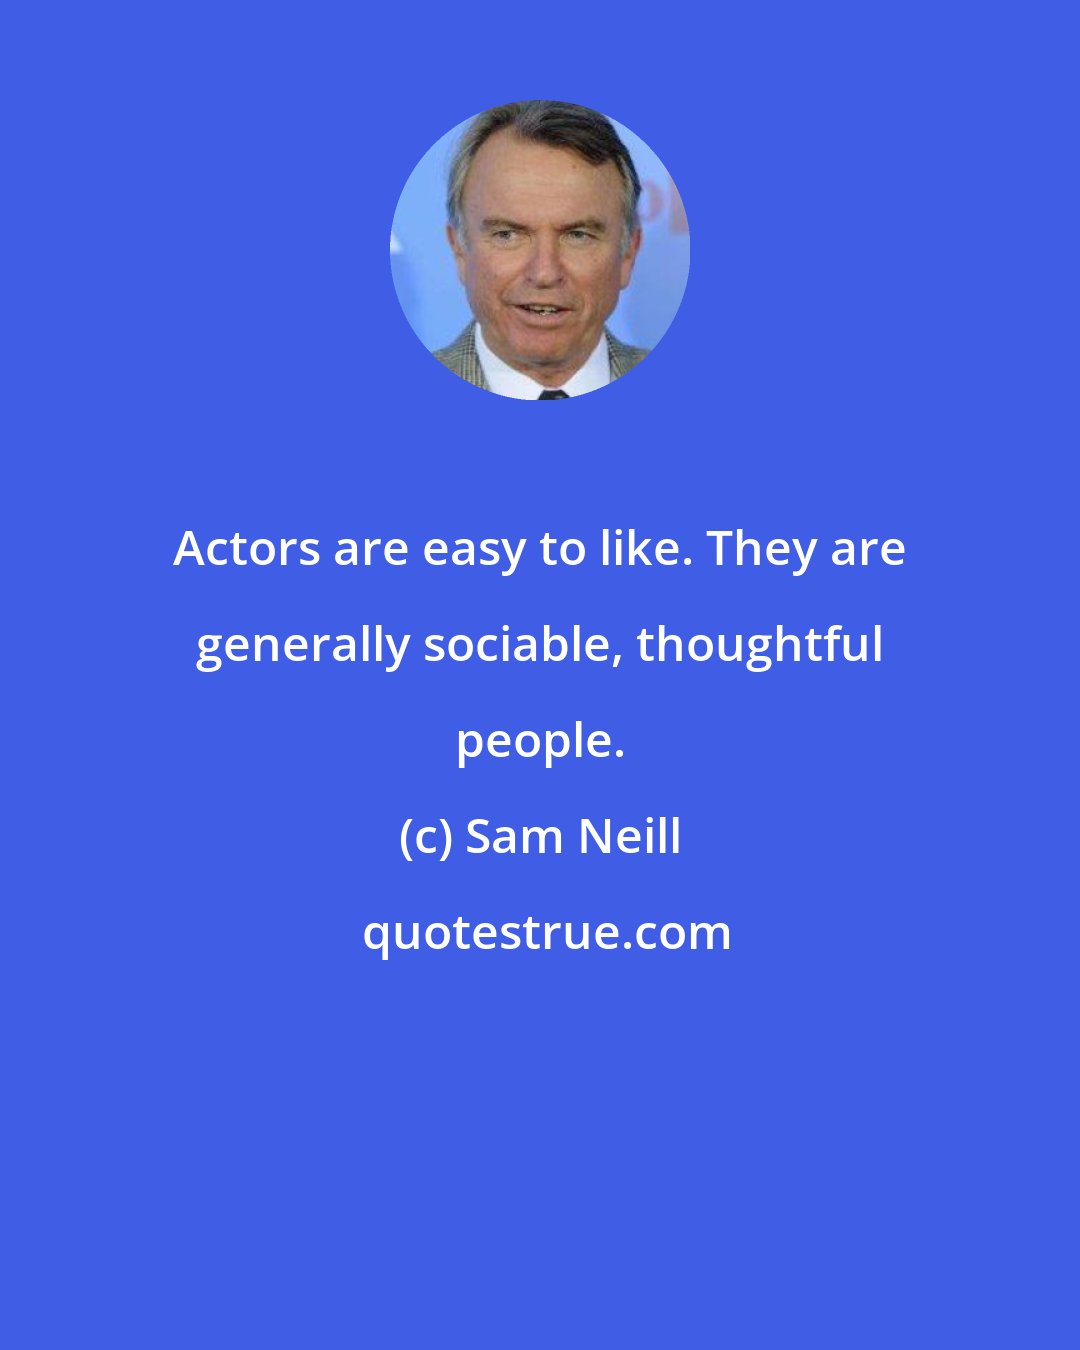 Sam Neill: Actors are easy to like. They are generally sociable, thoughtful people.